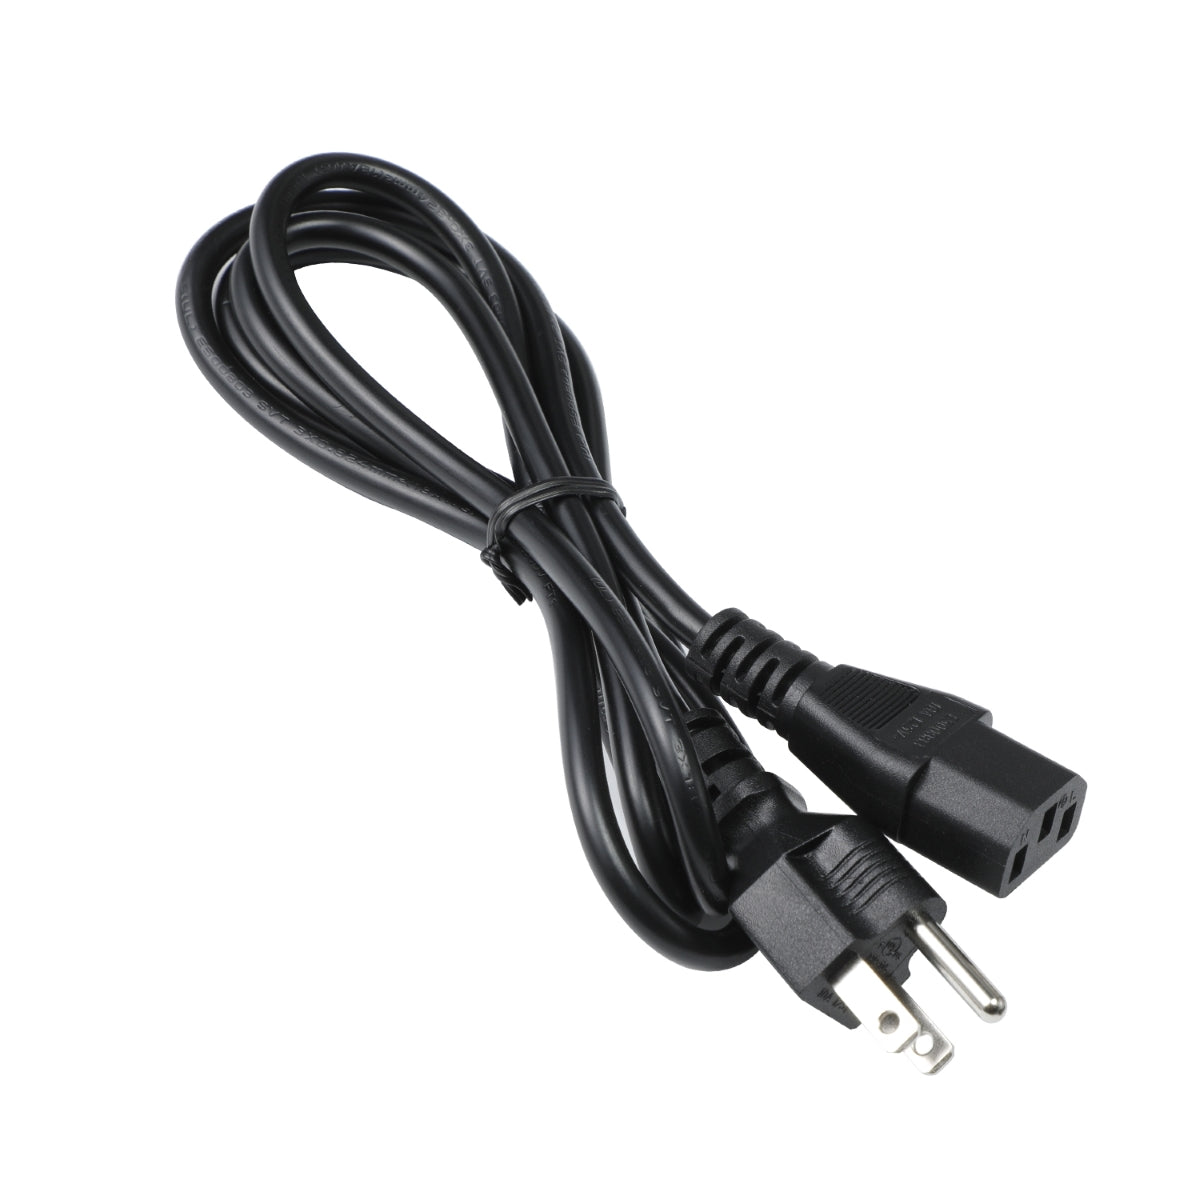 Power Cord for HP Pavilion Power 580-015xt Computer.